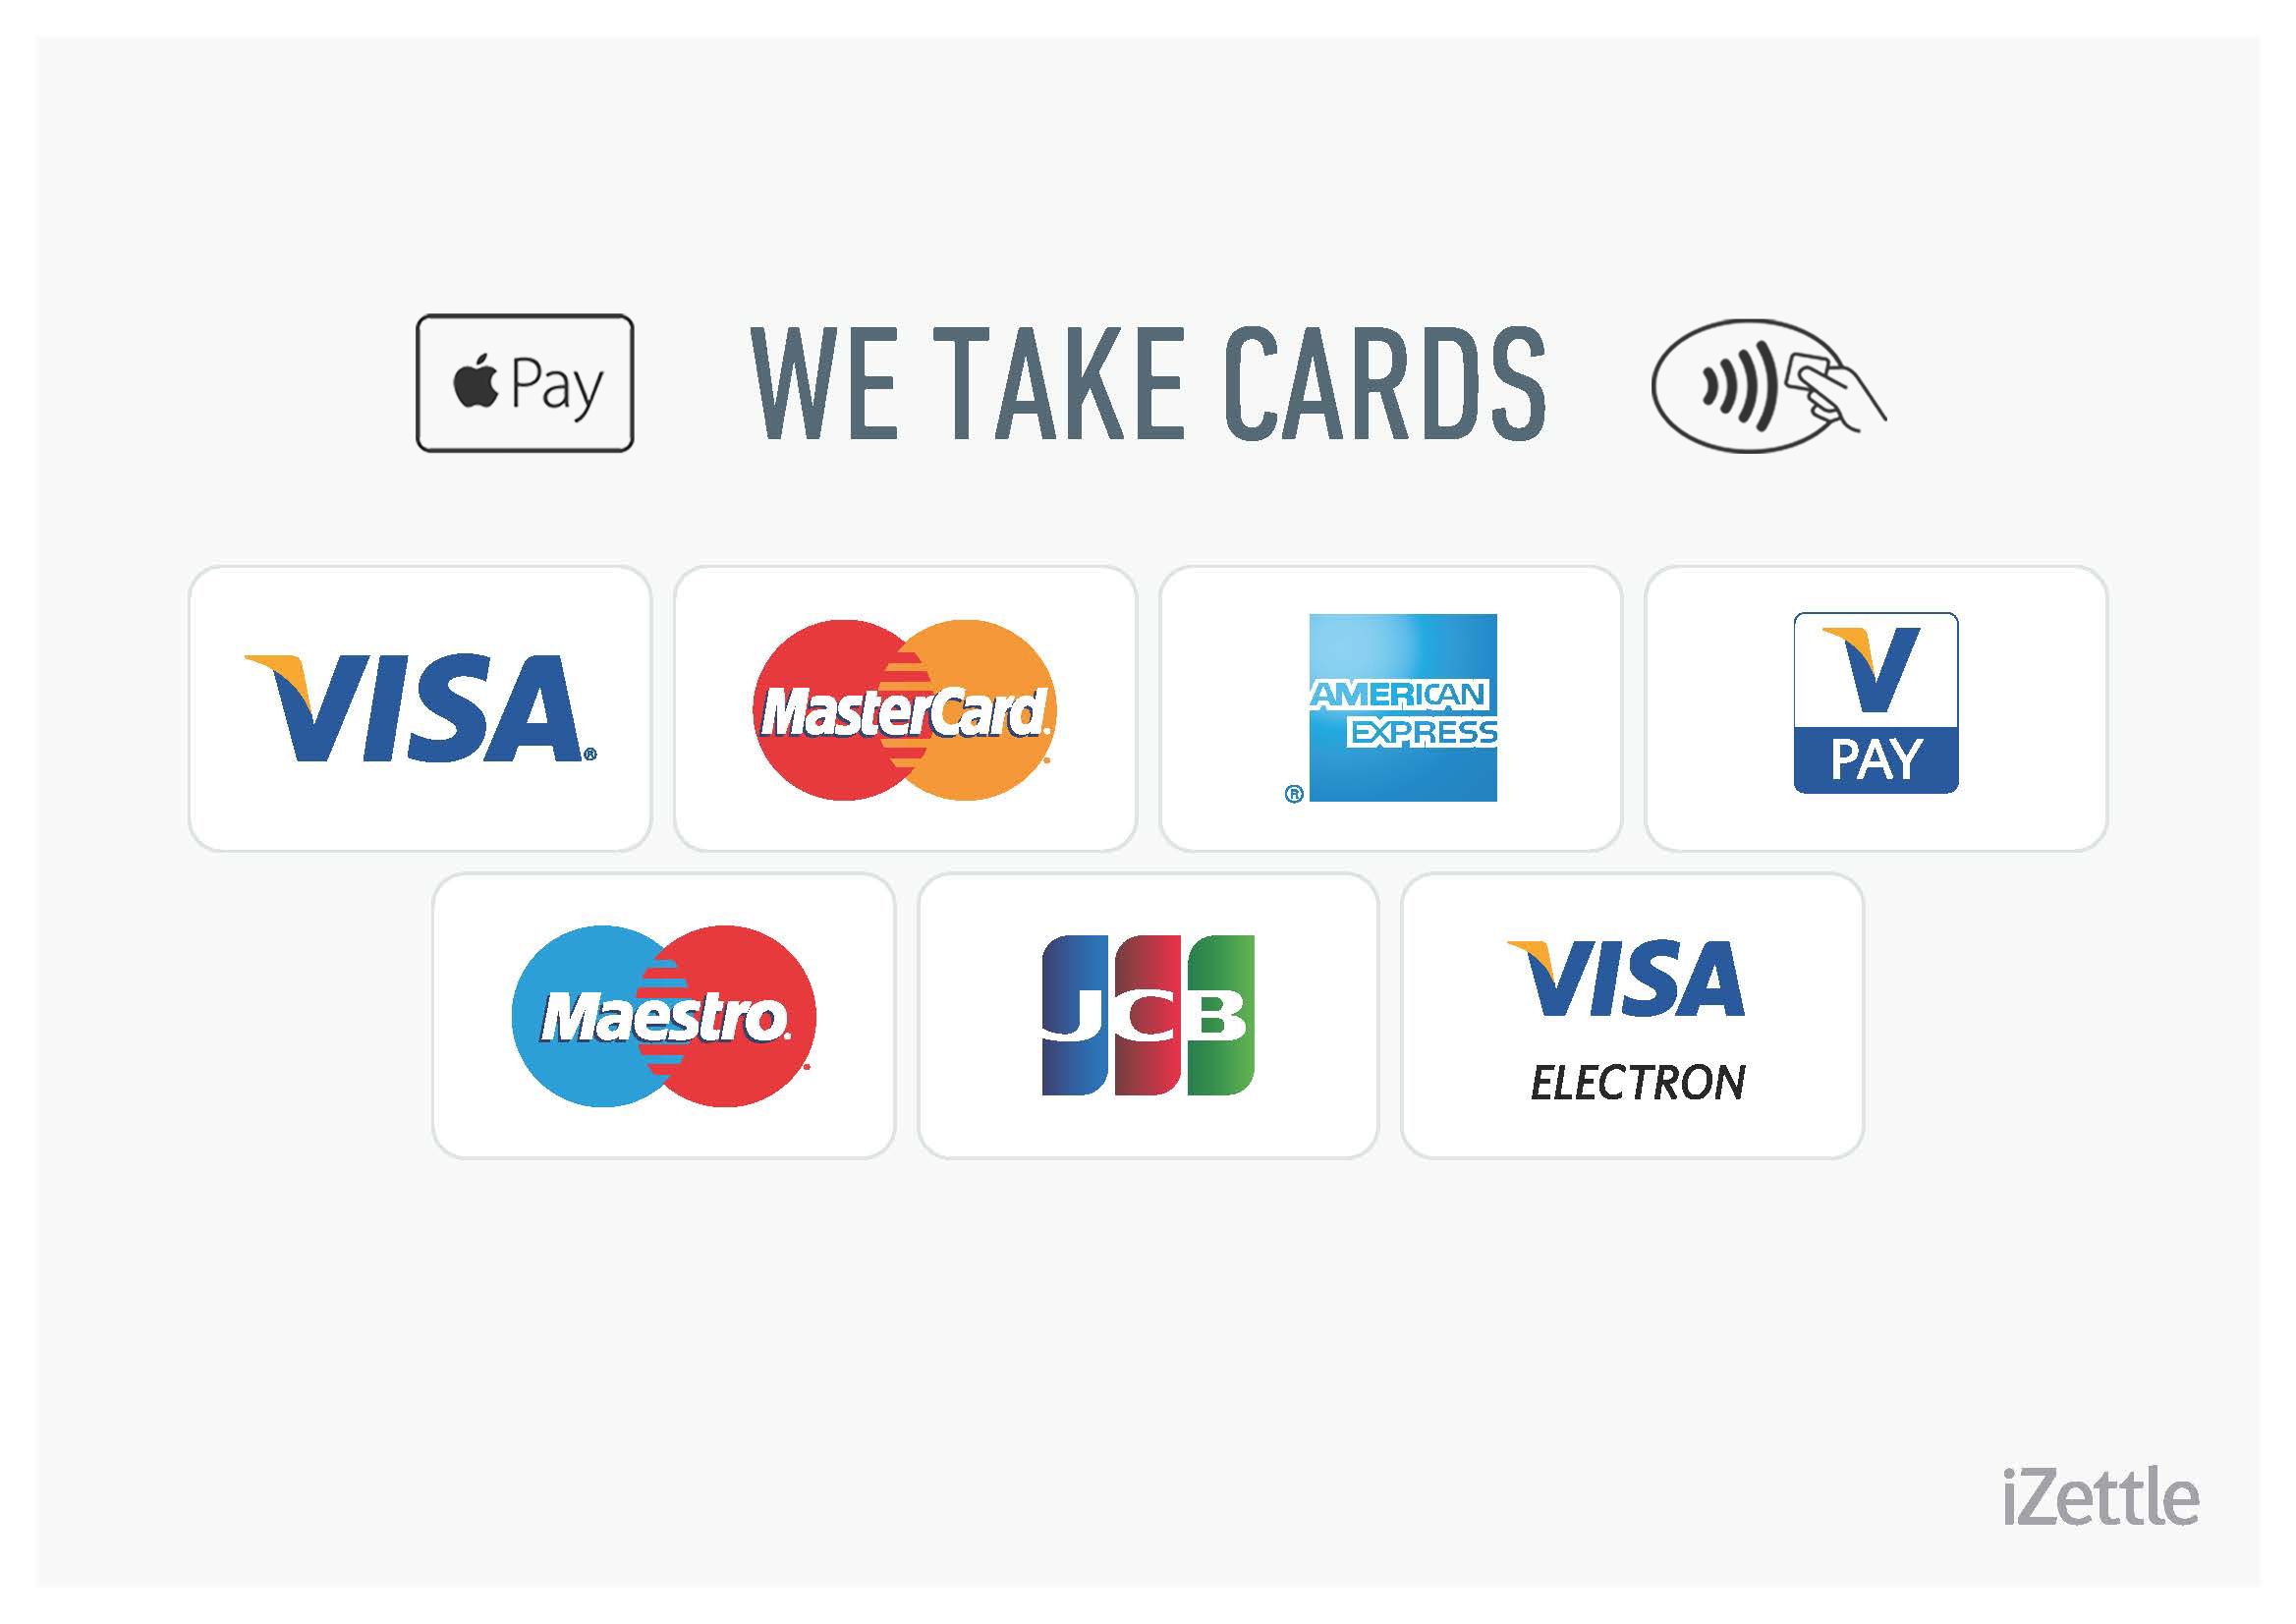 Accepted payments. Payment Card. Payment acceptance. New pay. How credit Cards work.